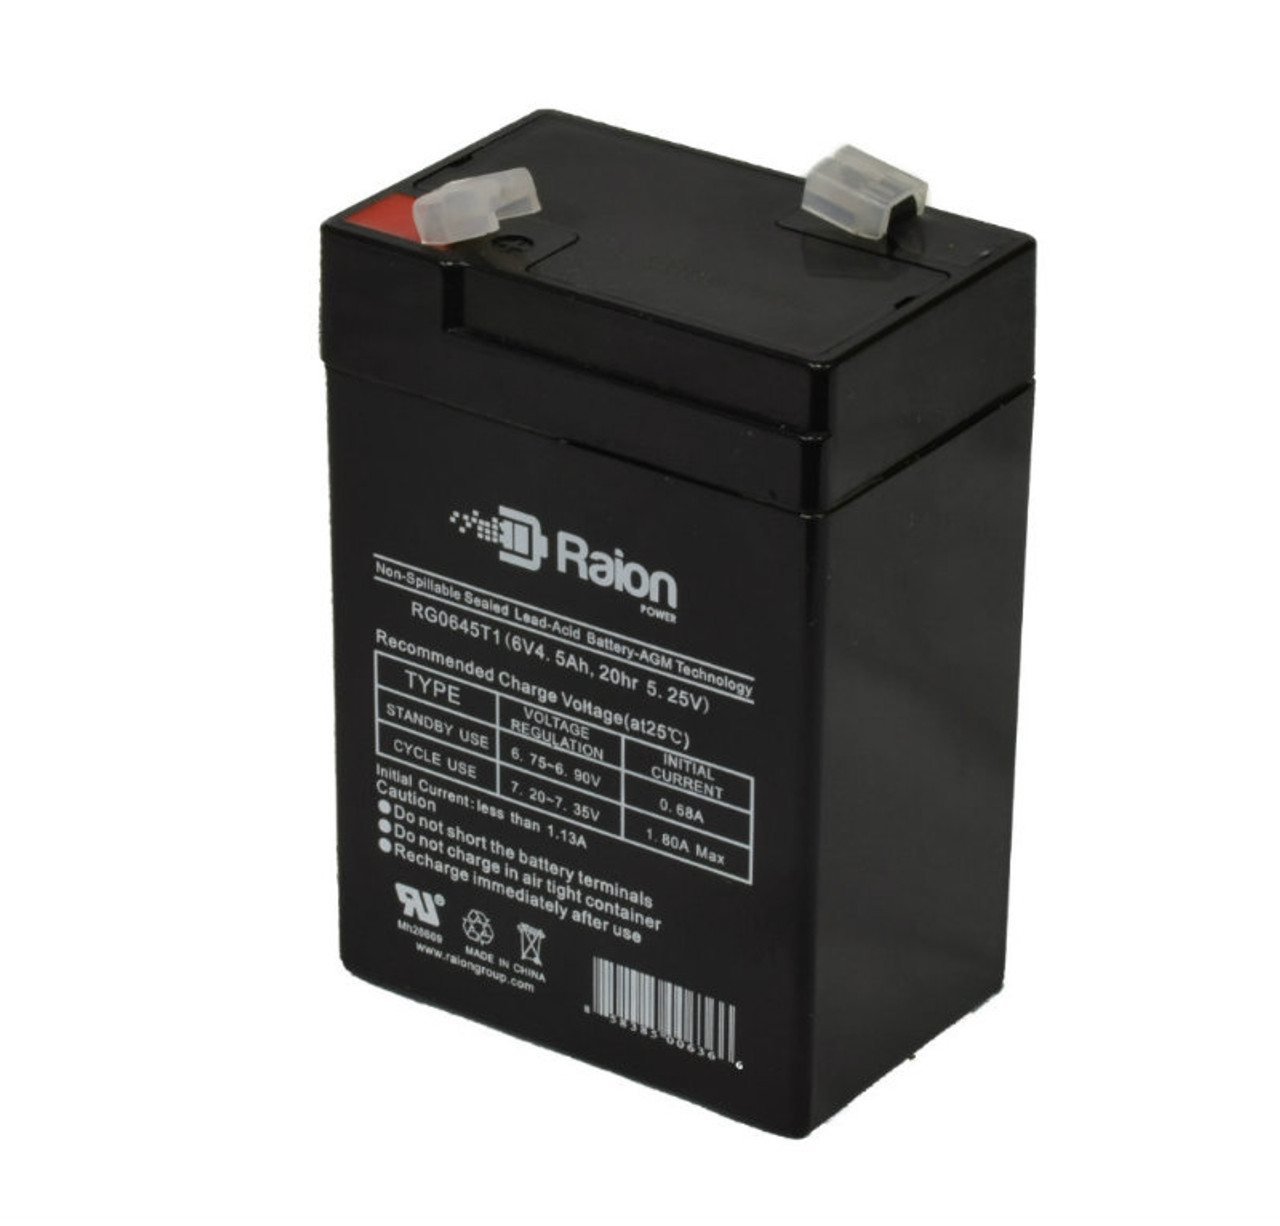 Raion Power RG0645T1 6V 4.5Ah Replacement Battery Cartridge for Chloride ERS